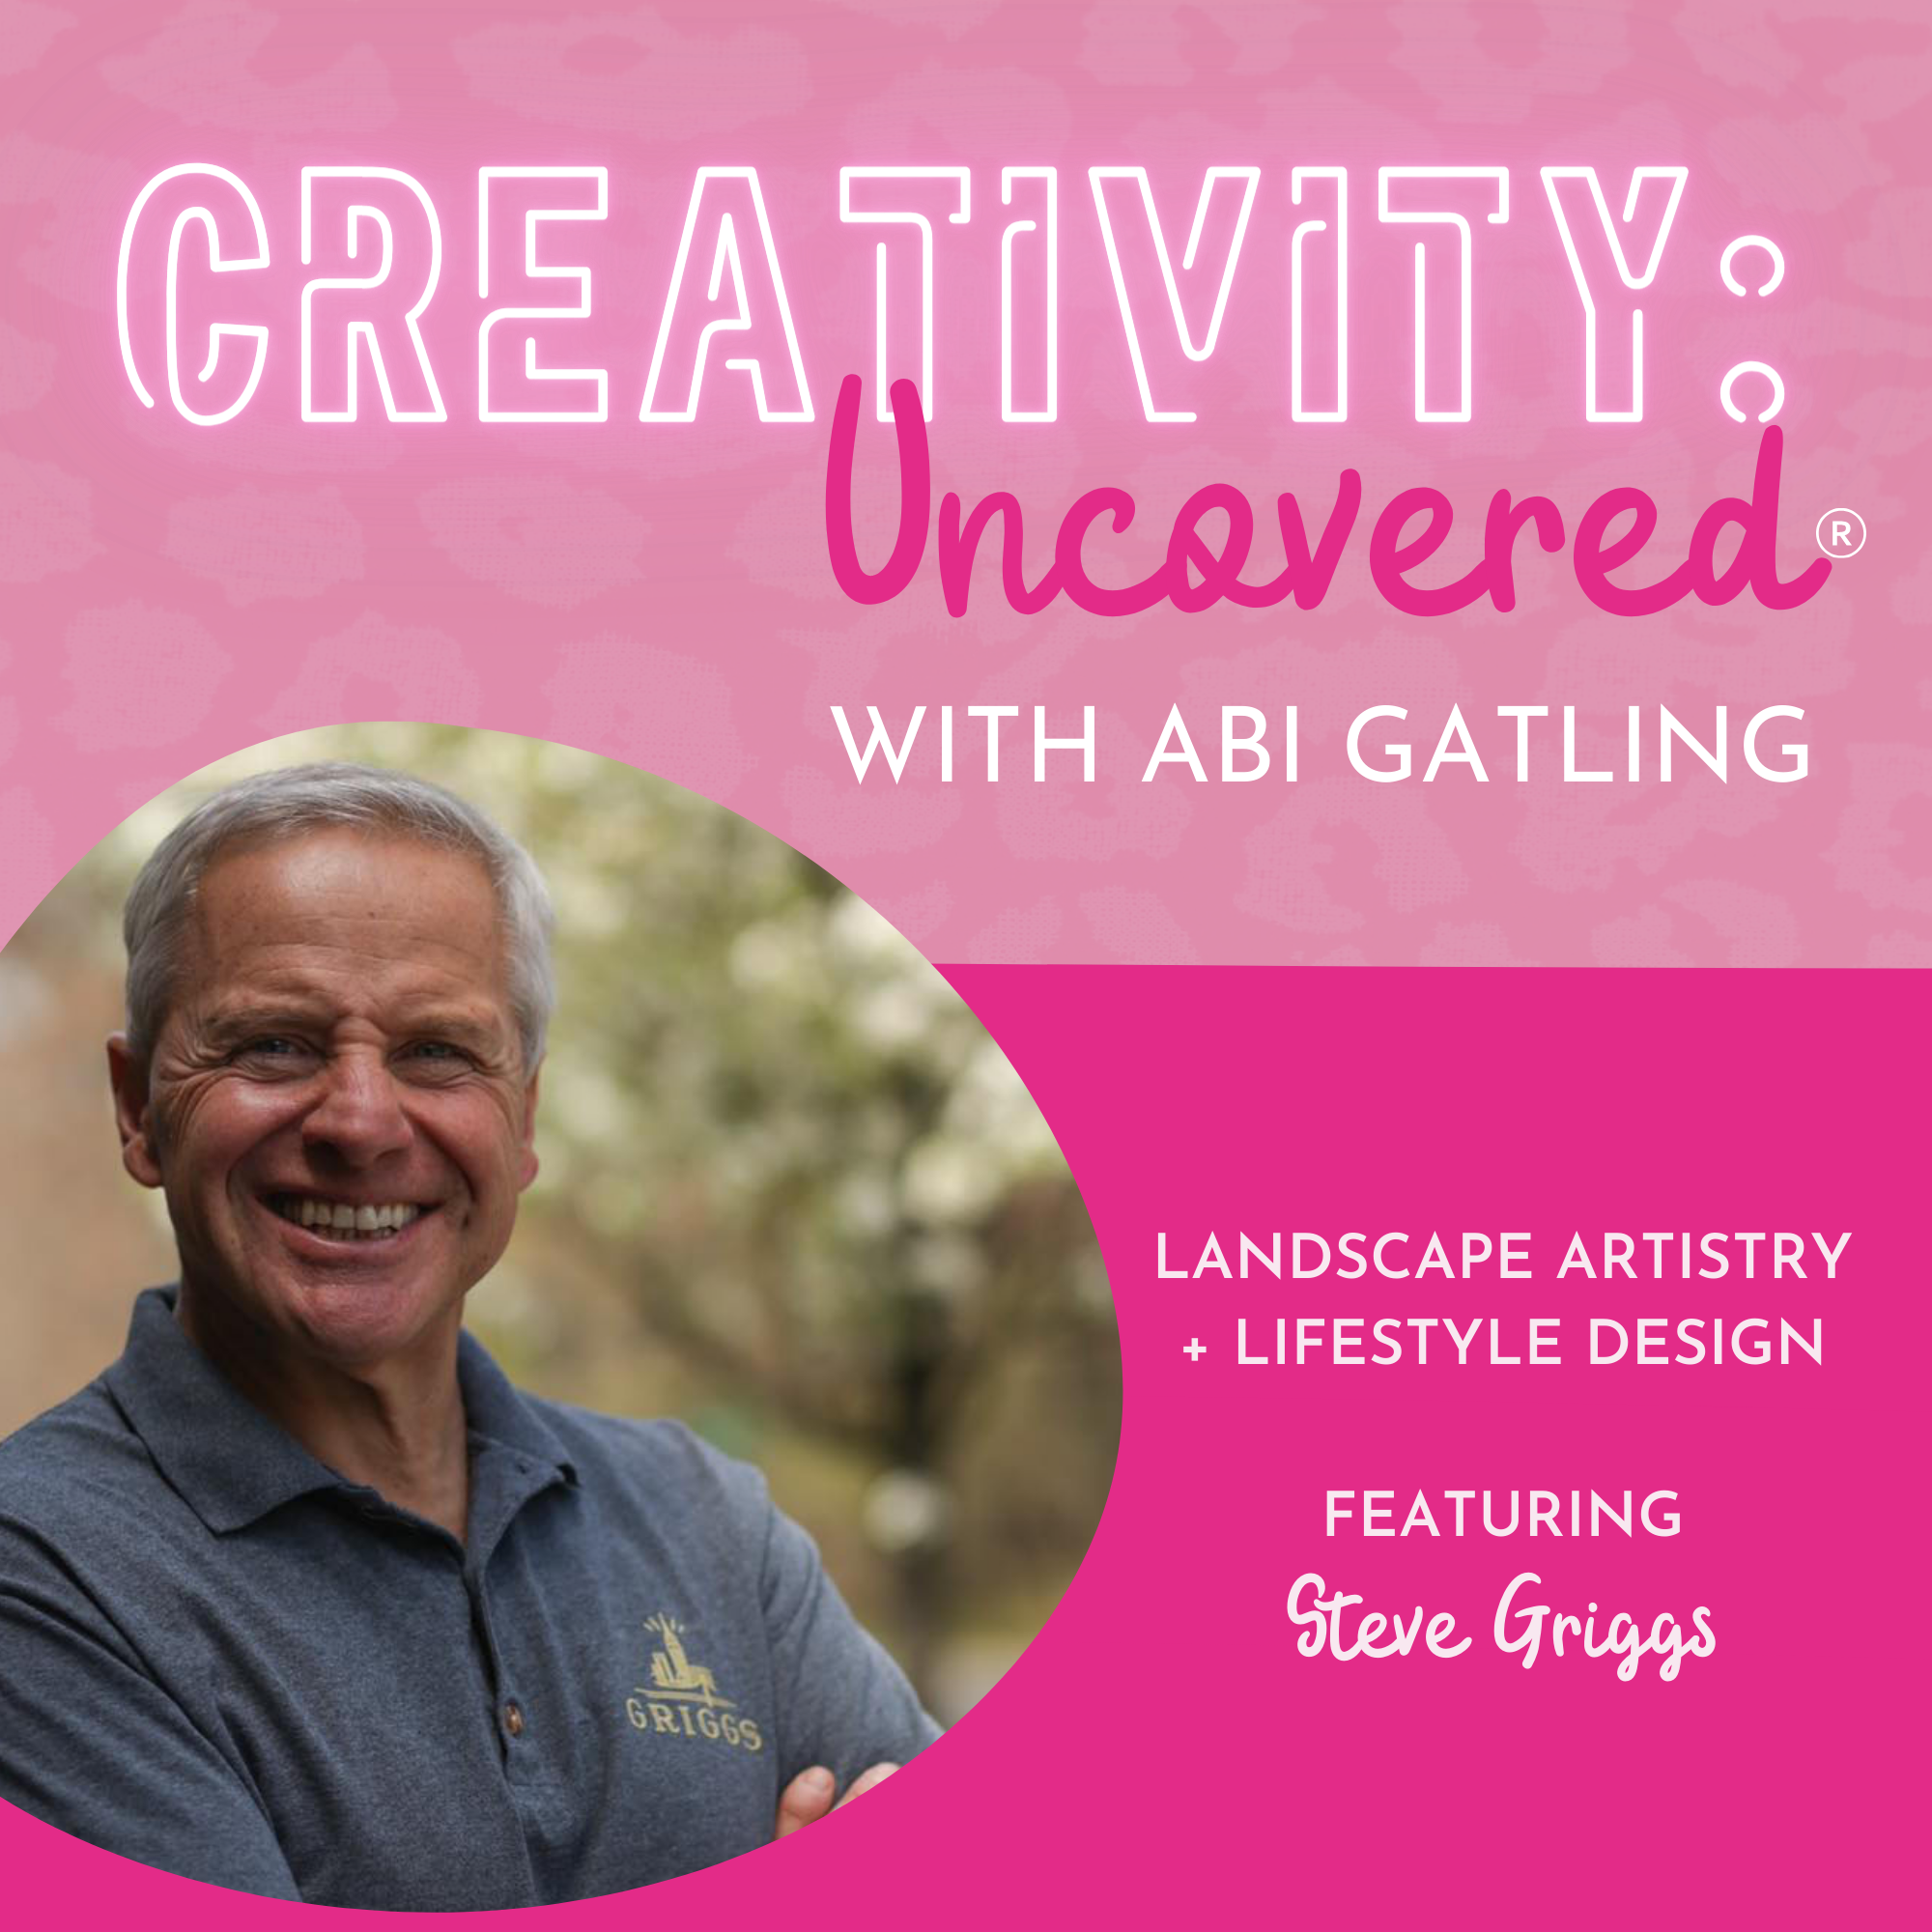 Creativity: Uncovered podcast episode graphic featuring guest Steve Griggs